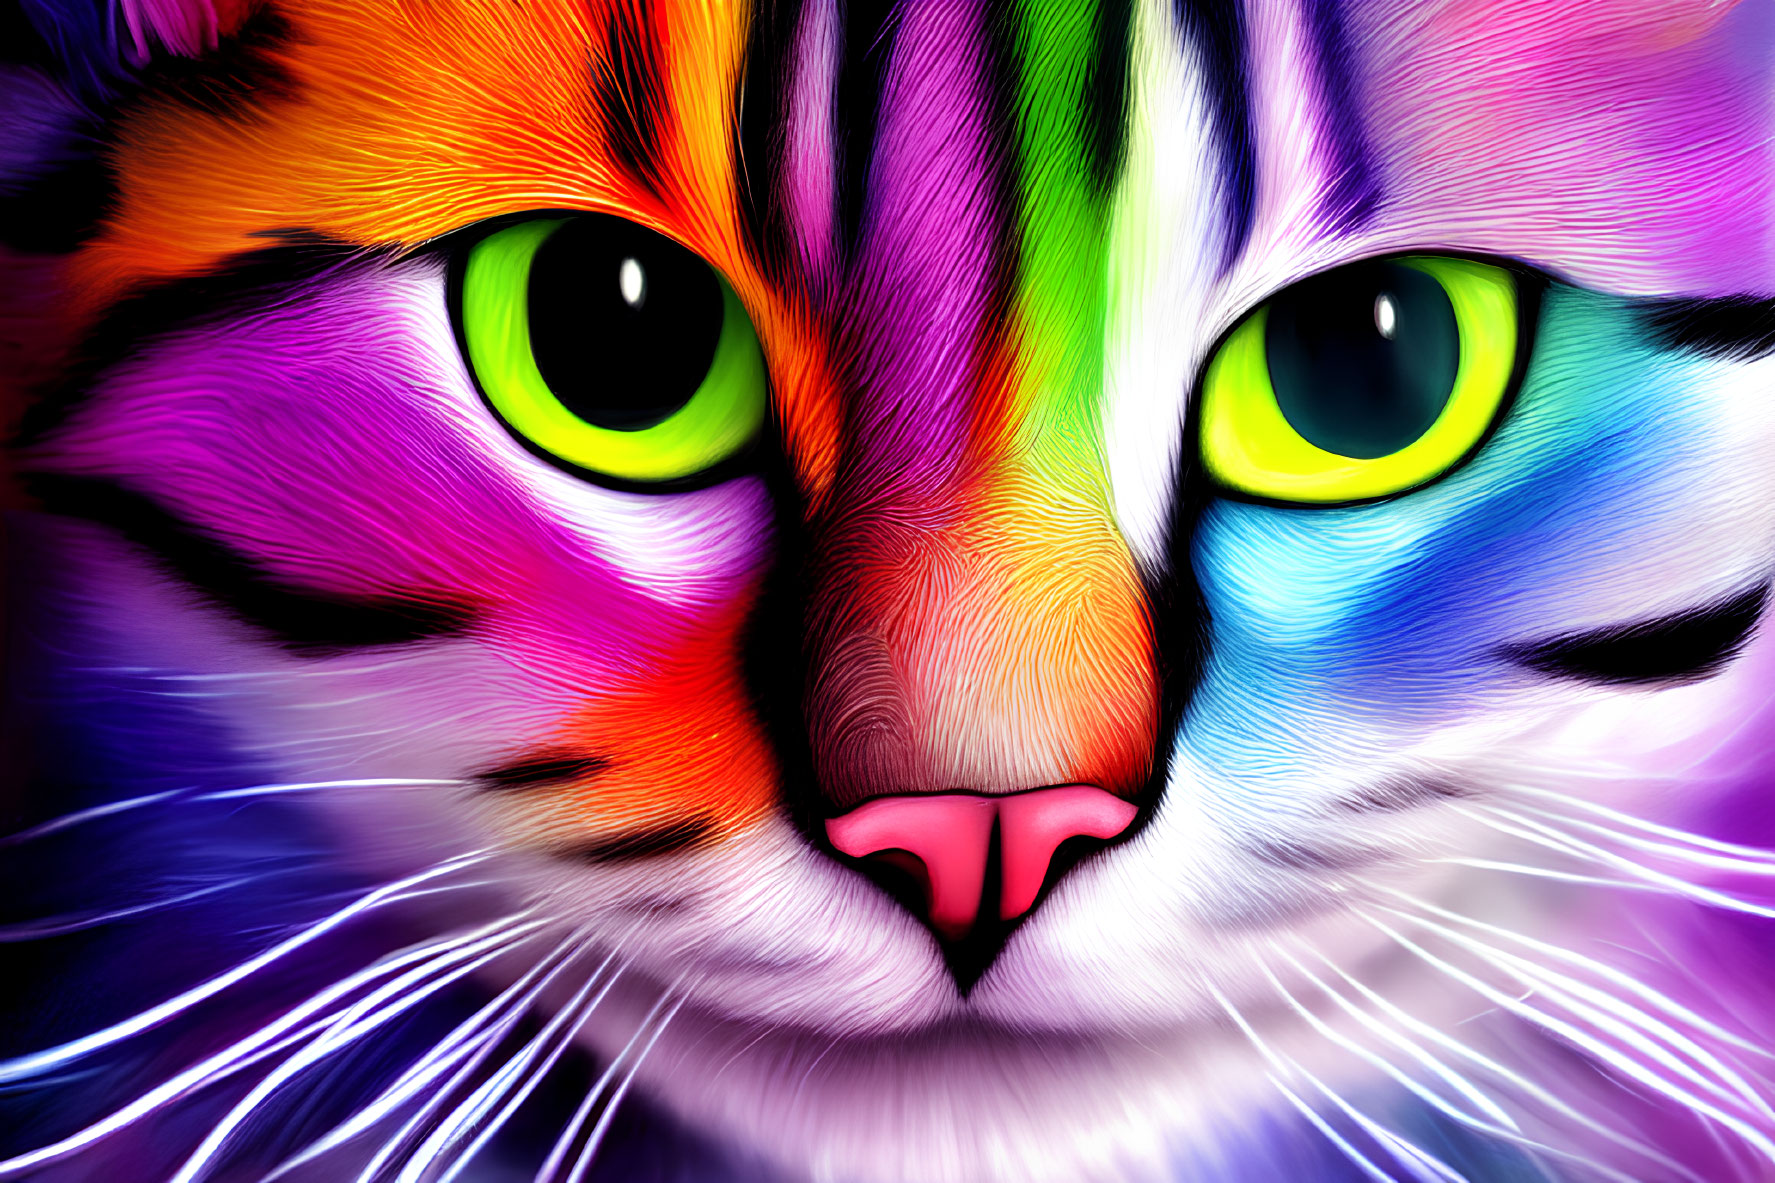 Colorful Digital Painting of Cat with Green Eyes & Multicolored Fur